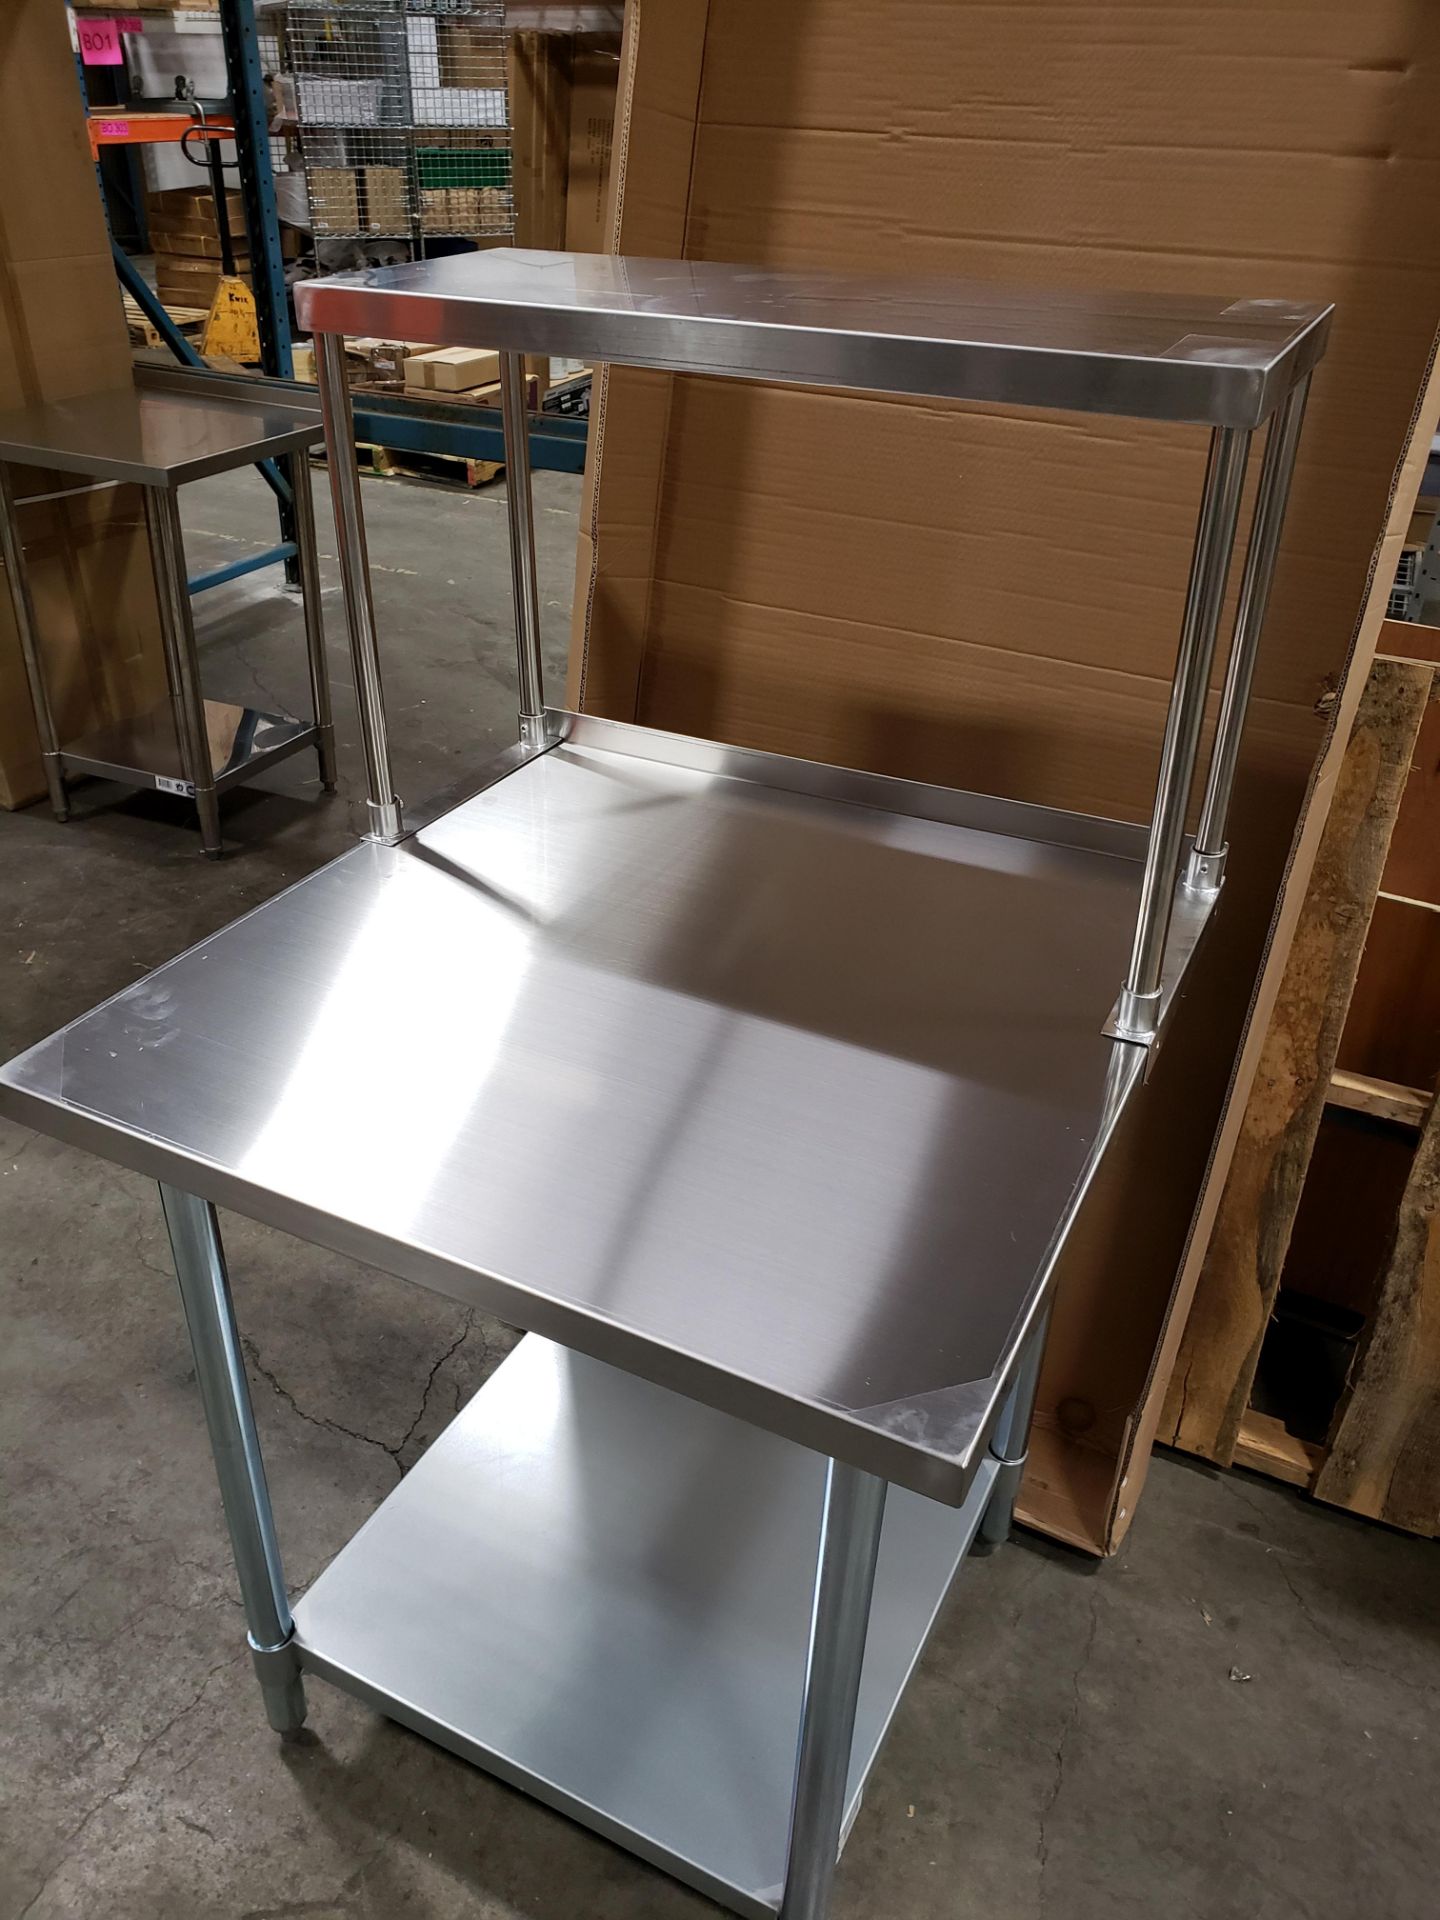 30" x 30" Stainless Table with 1.5" Backsplash and 12" x 30" Overshelf - Image 2 of 3